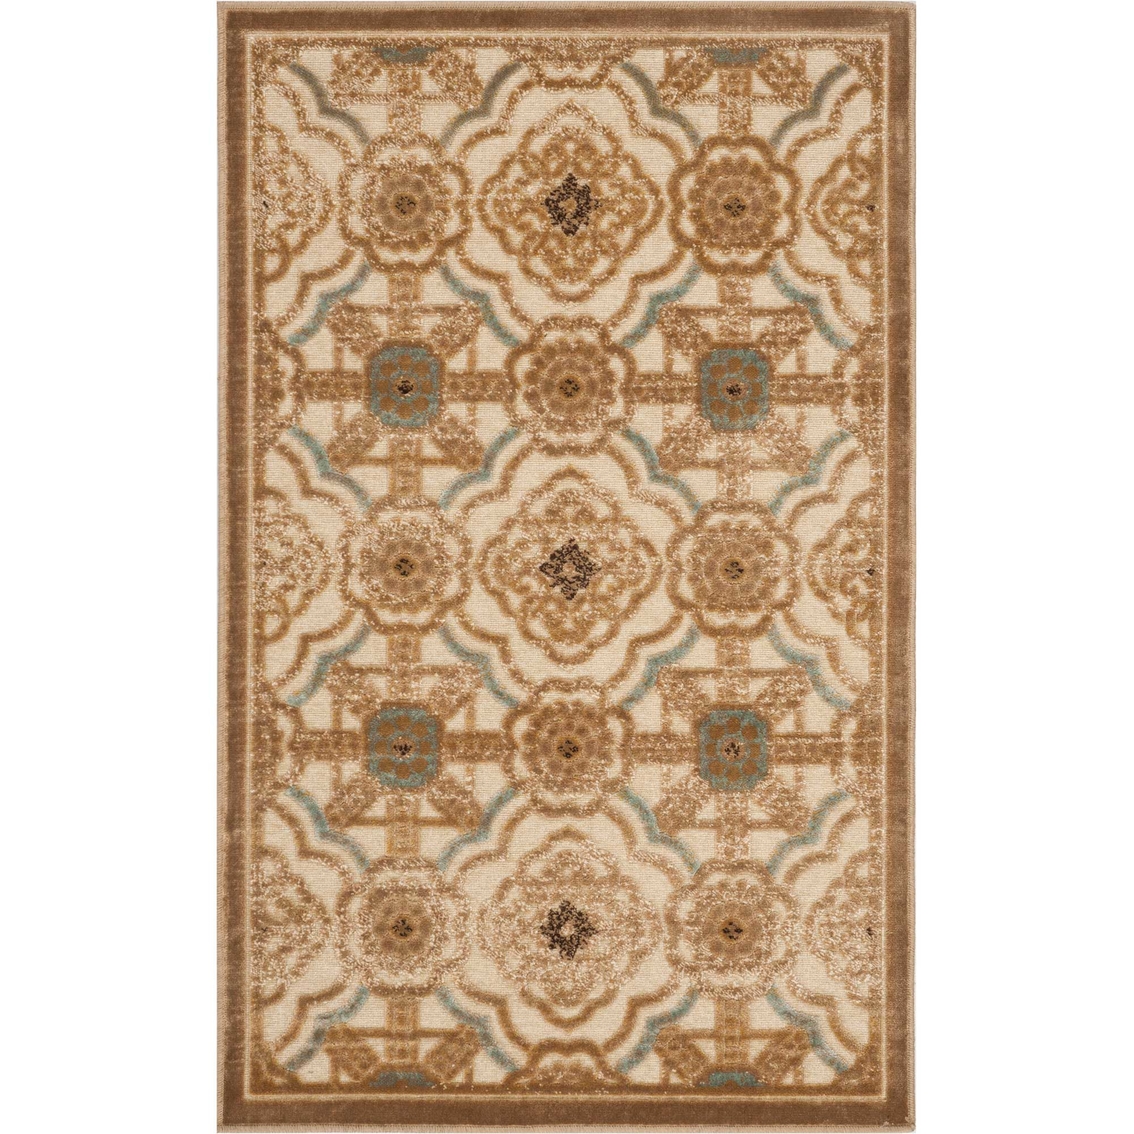 Martha Stewart Collection Imperial Palace Area Rug - Image 2 of 4